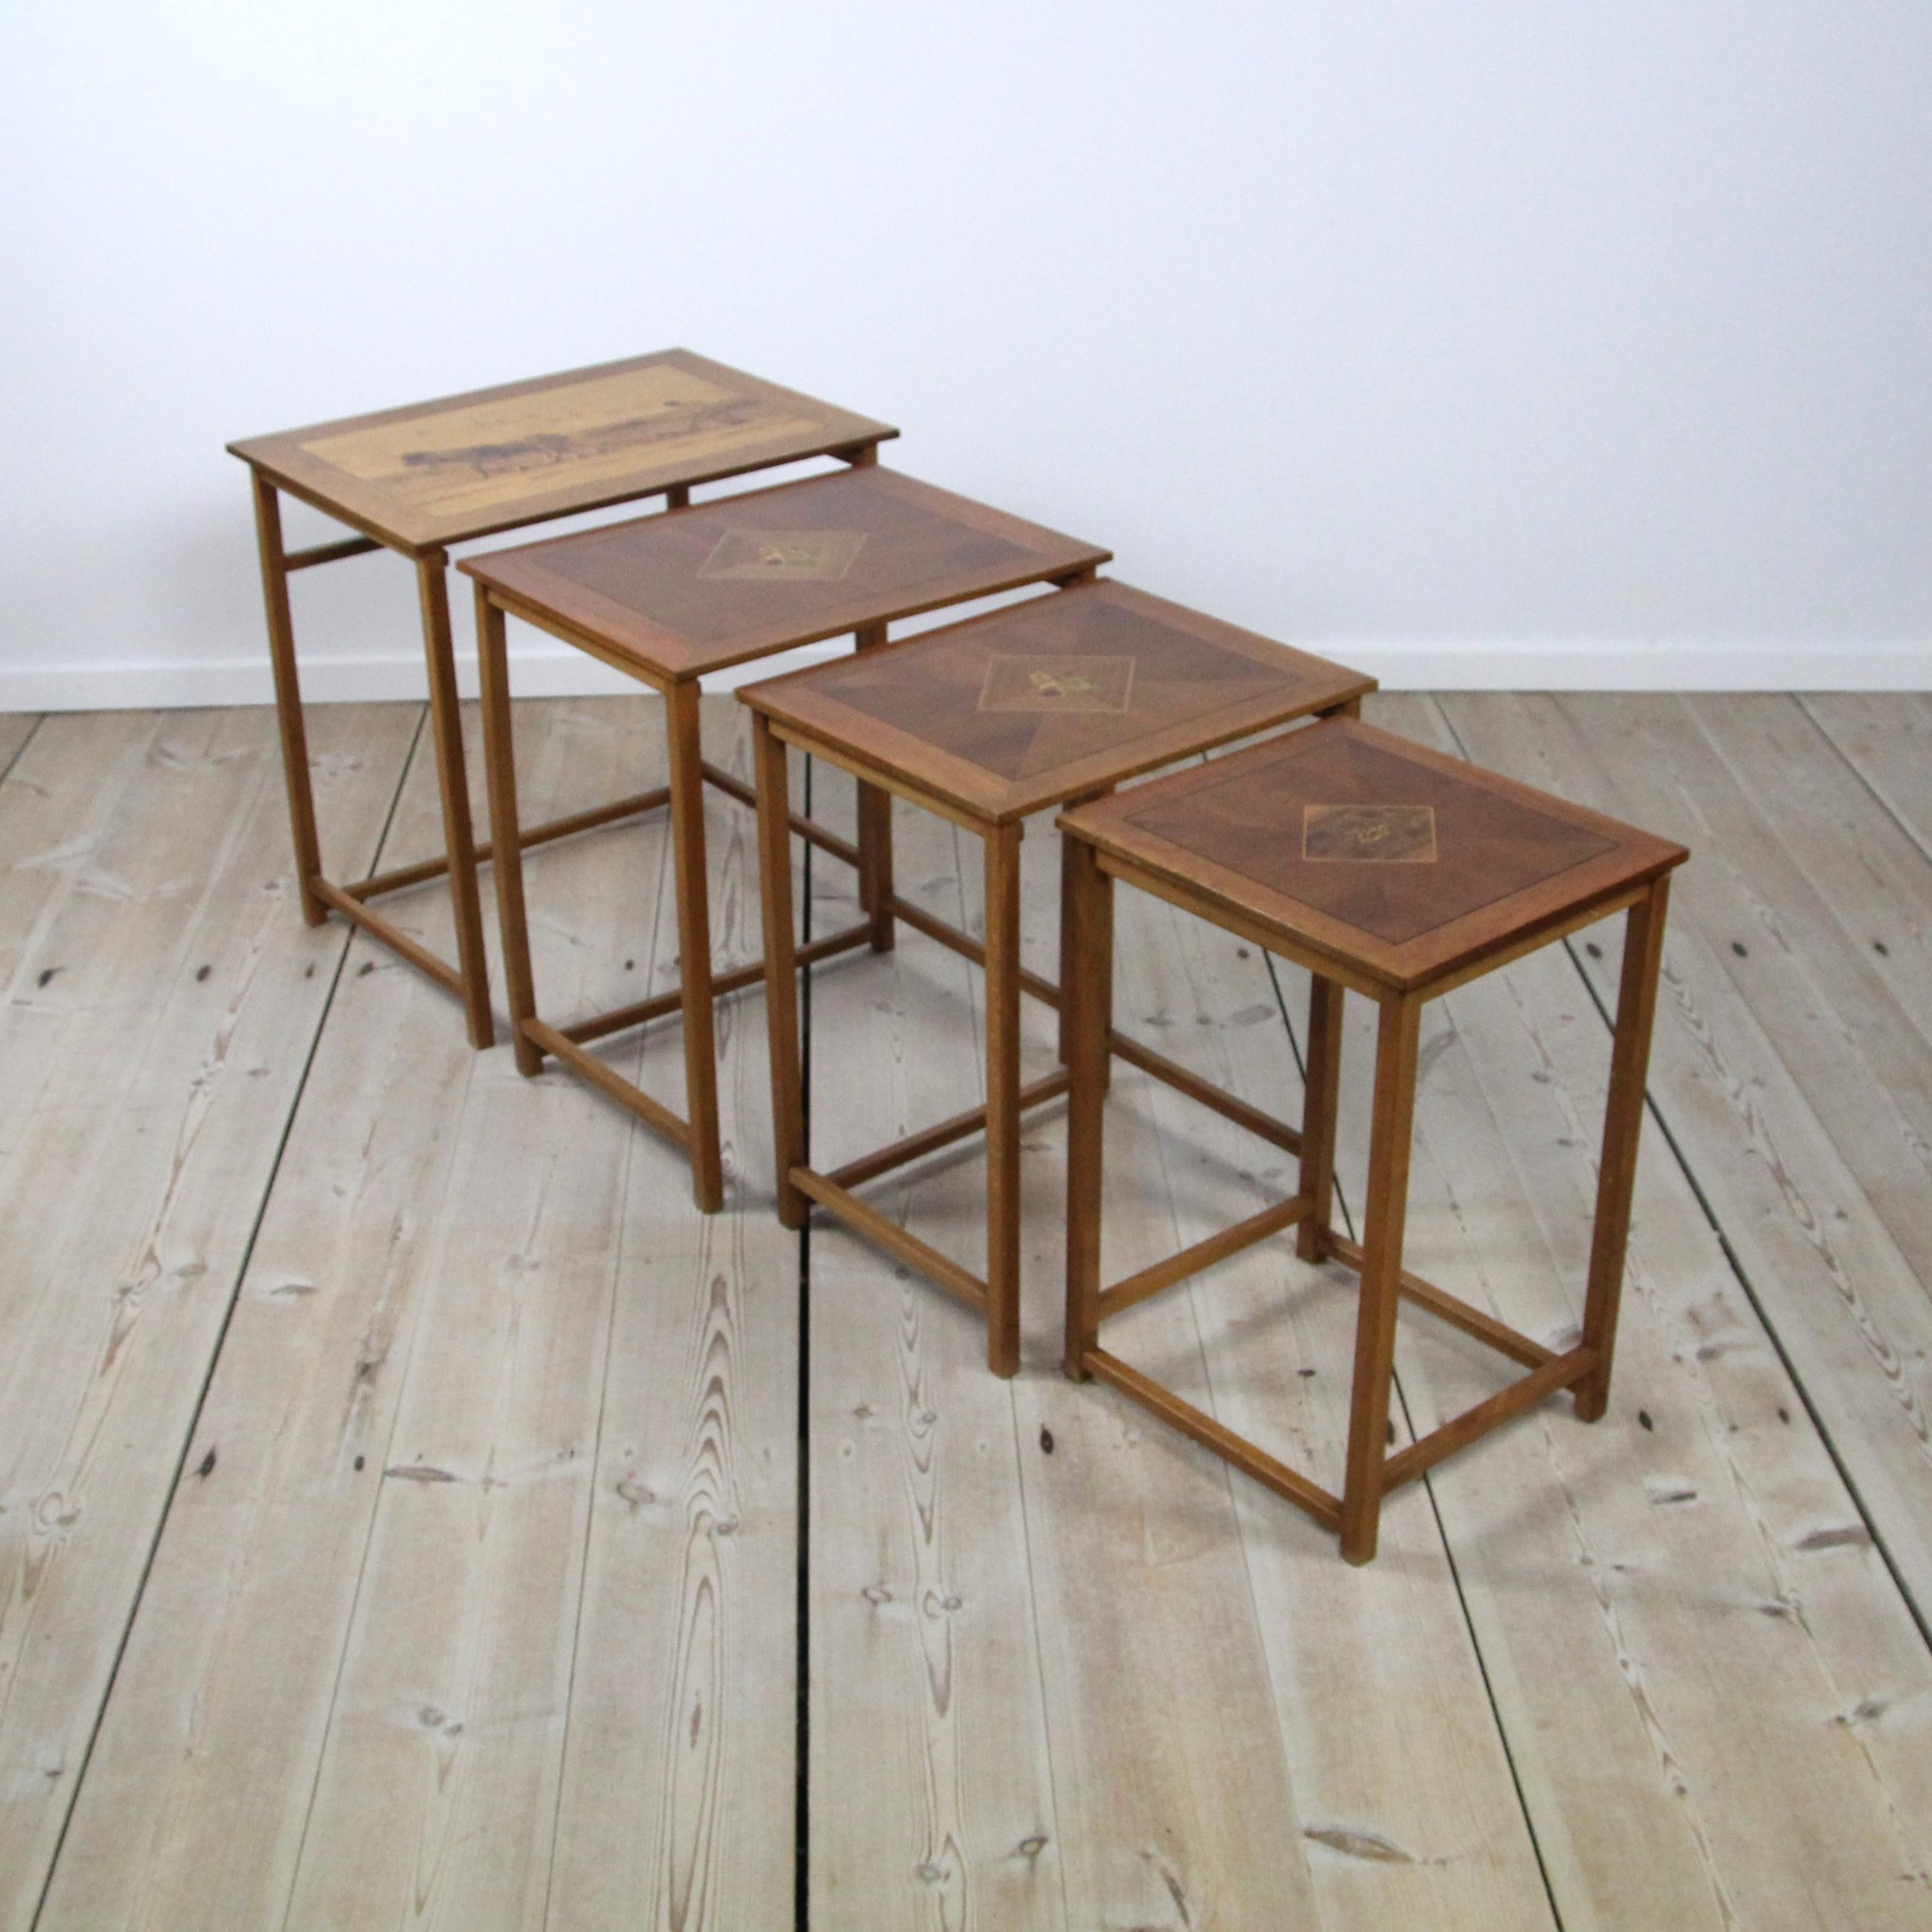 Set of 4 nest tables in oak w/ inlay – 1950’s